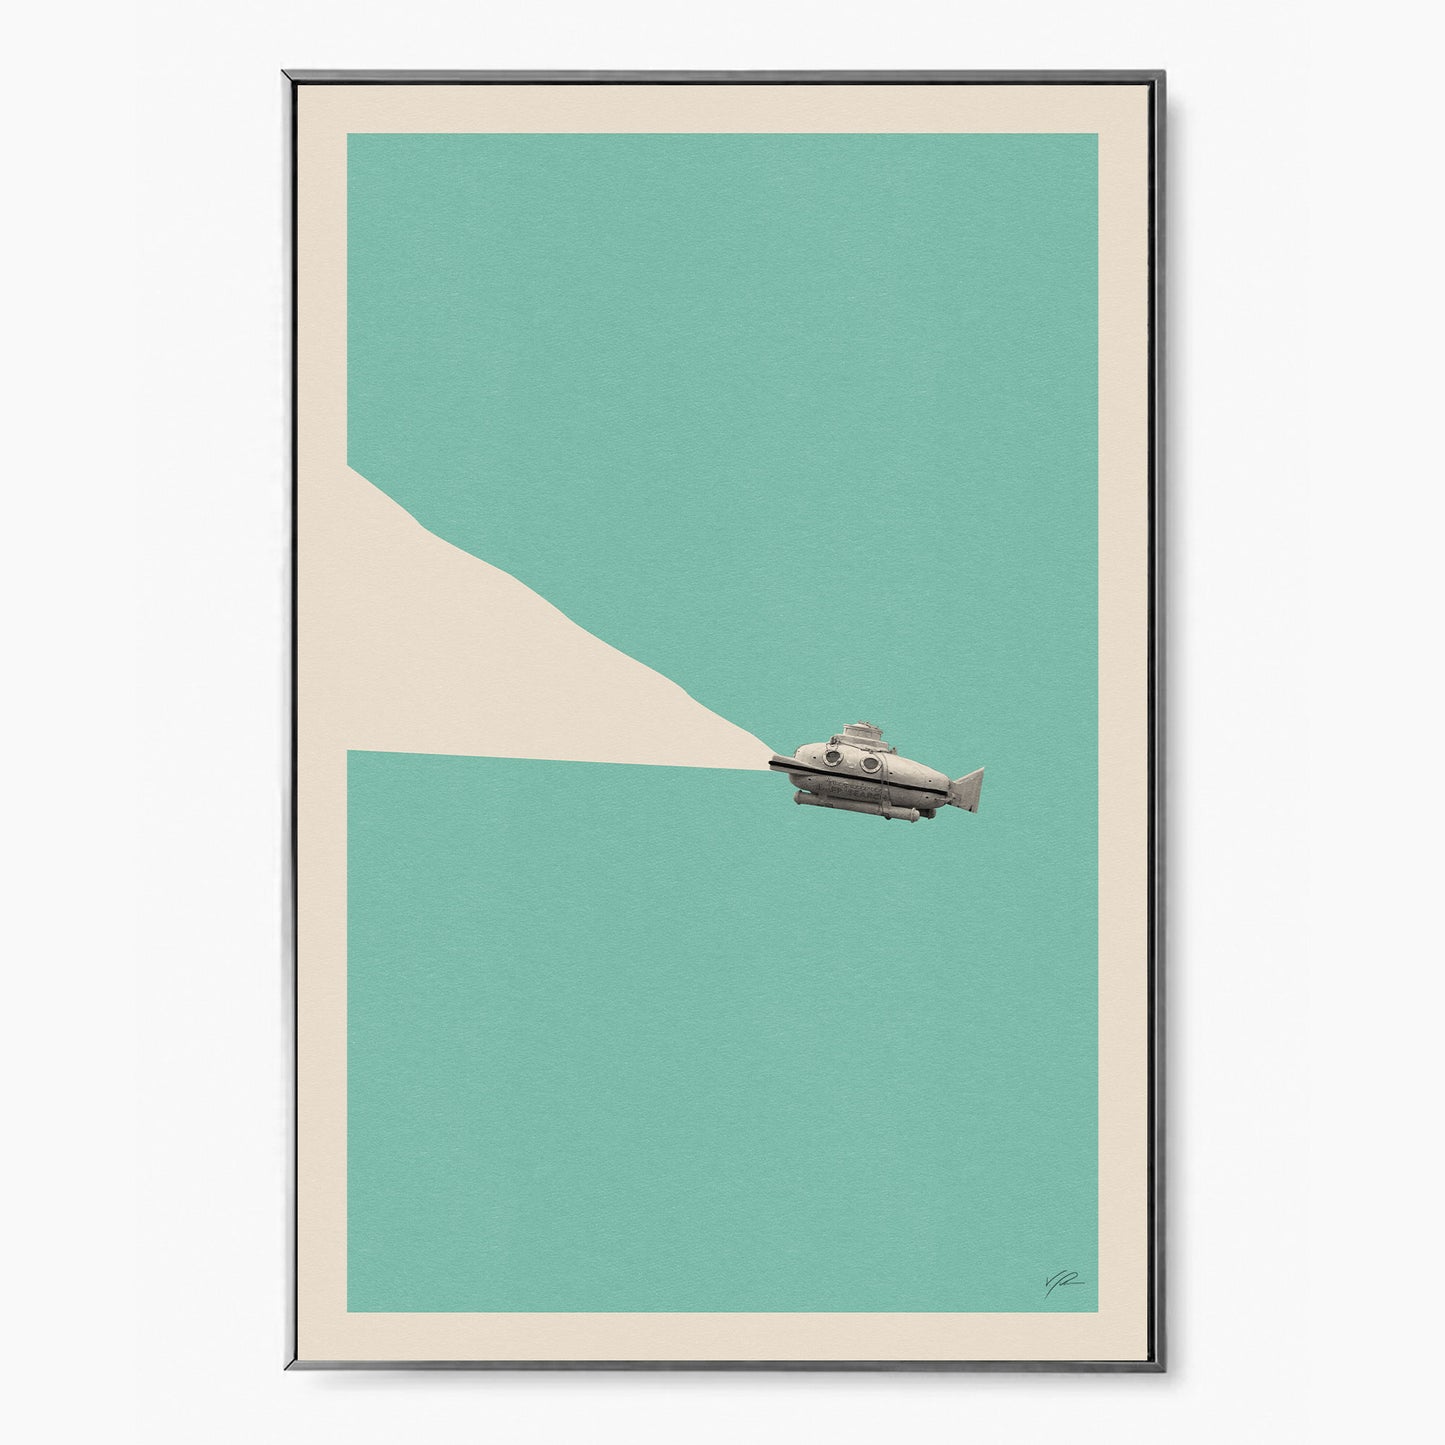 The Life Aquatic with Steve Zissou Inspired Poster | Minimalist Art Print | Retro Art Print | Wall Art | Housewarming Gift | Wes Anderson Movie Poster